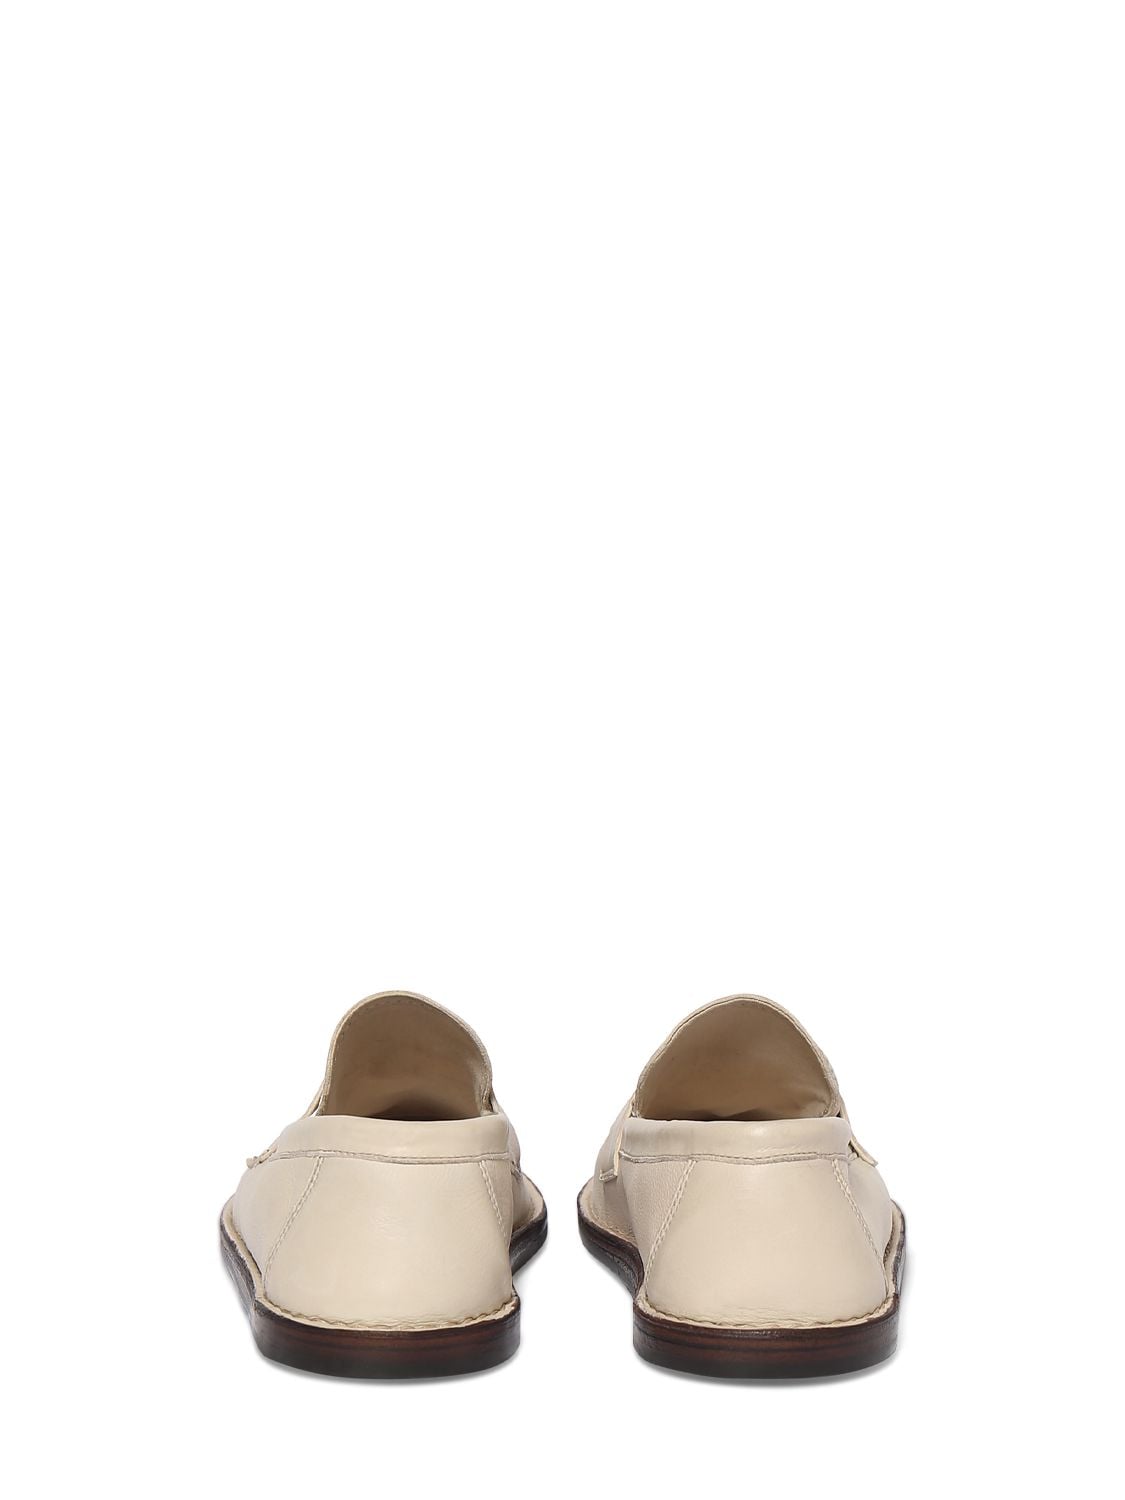 Shop The Row Cary Leather Loafers In Cream